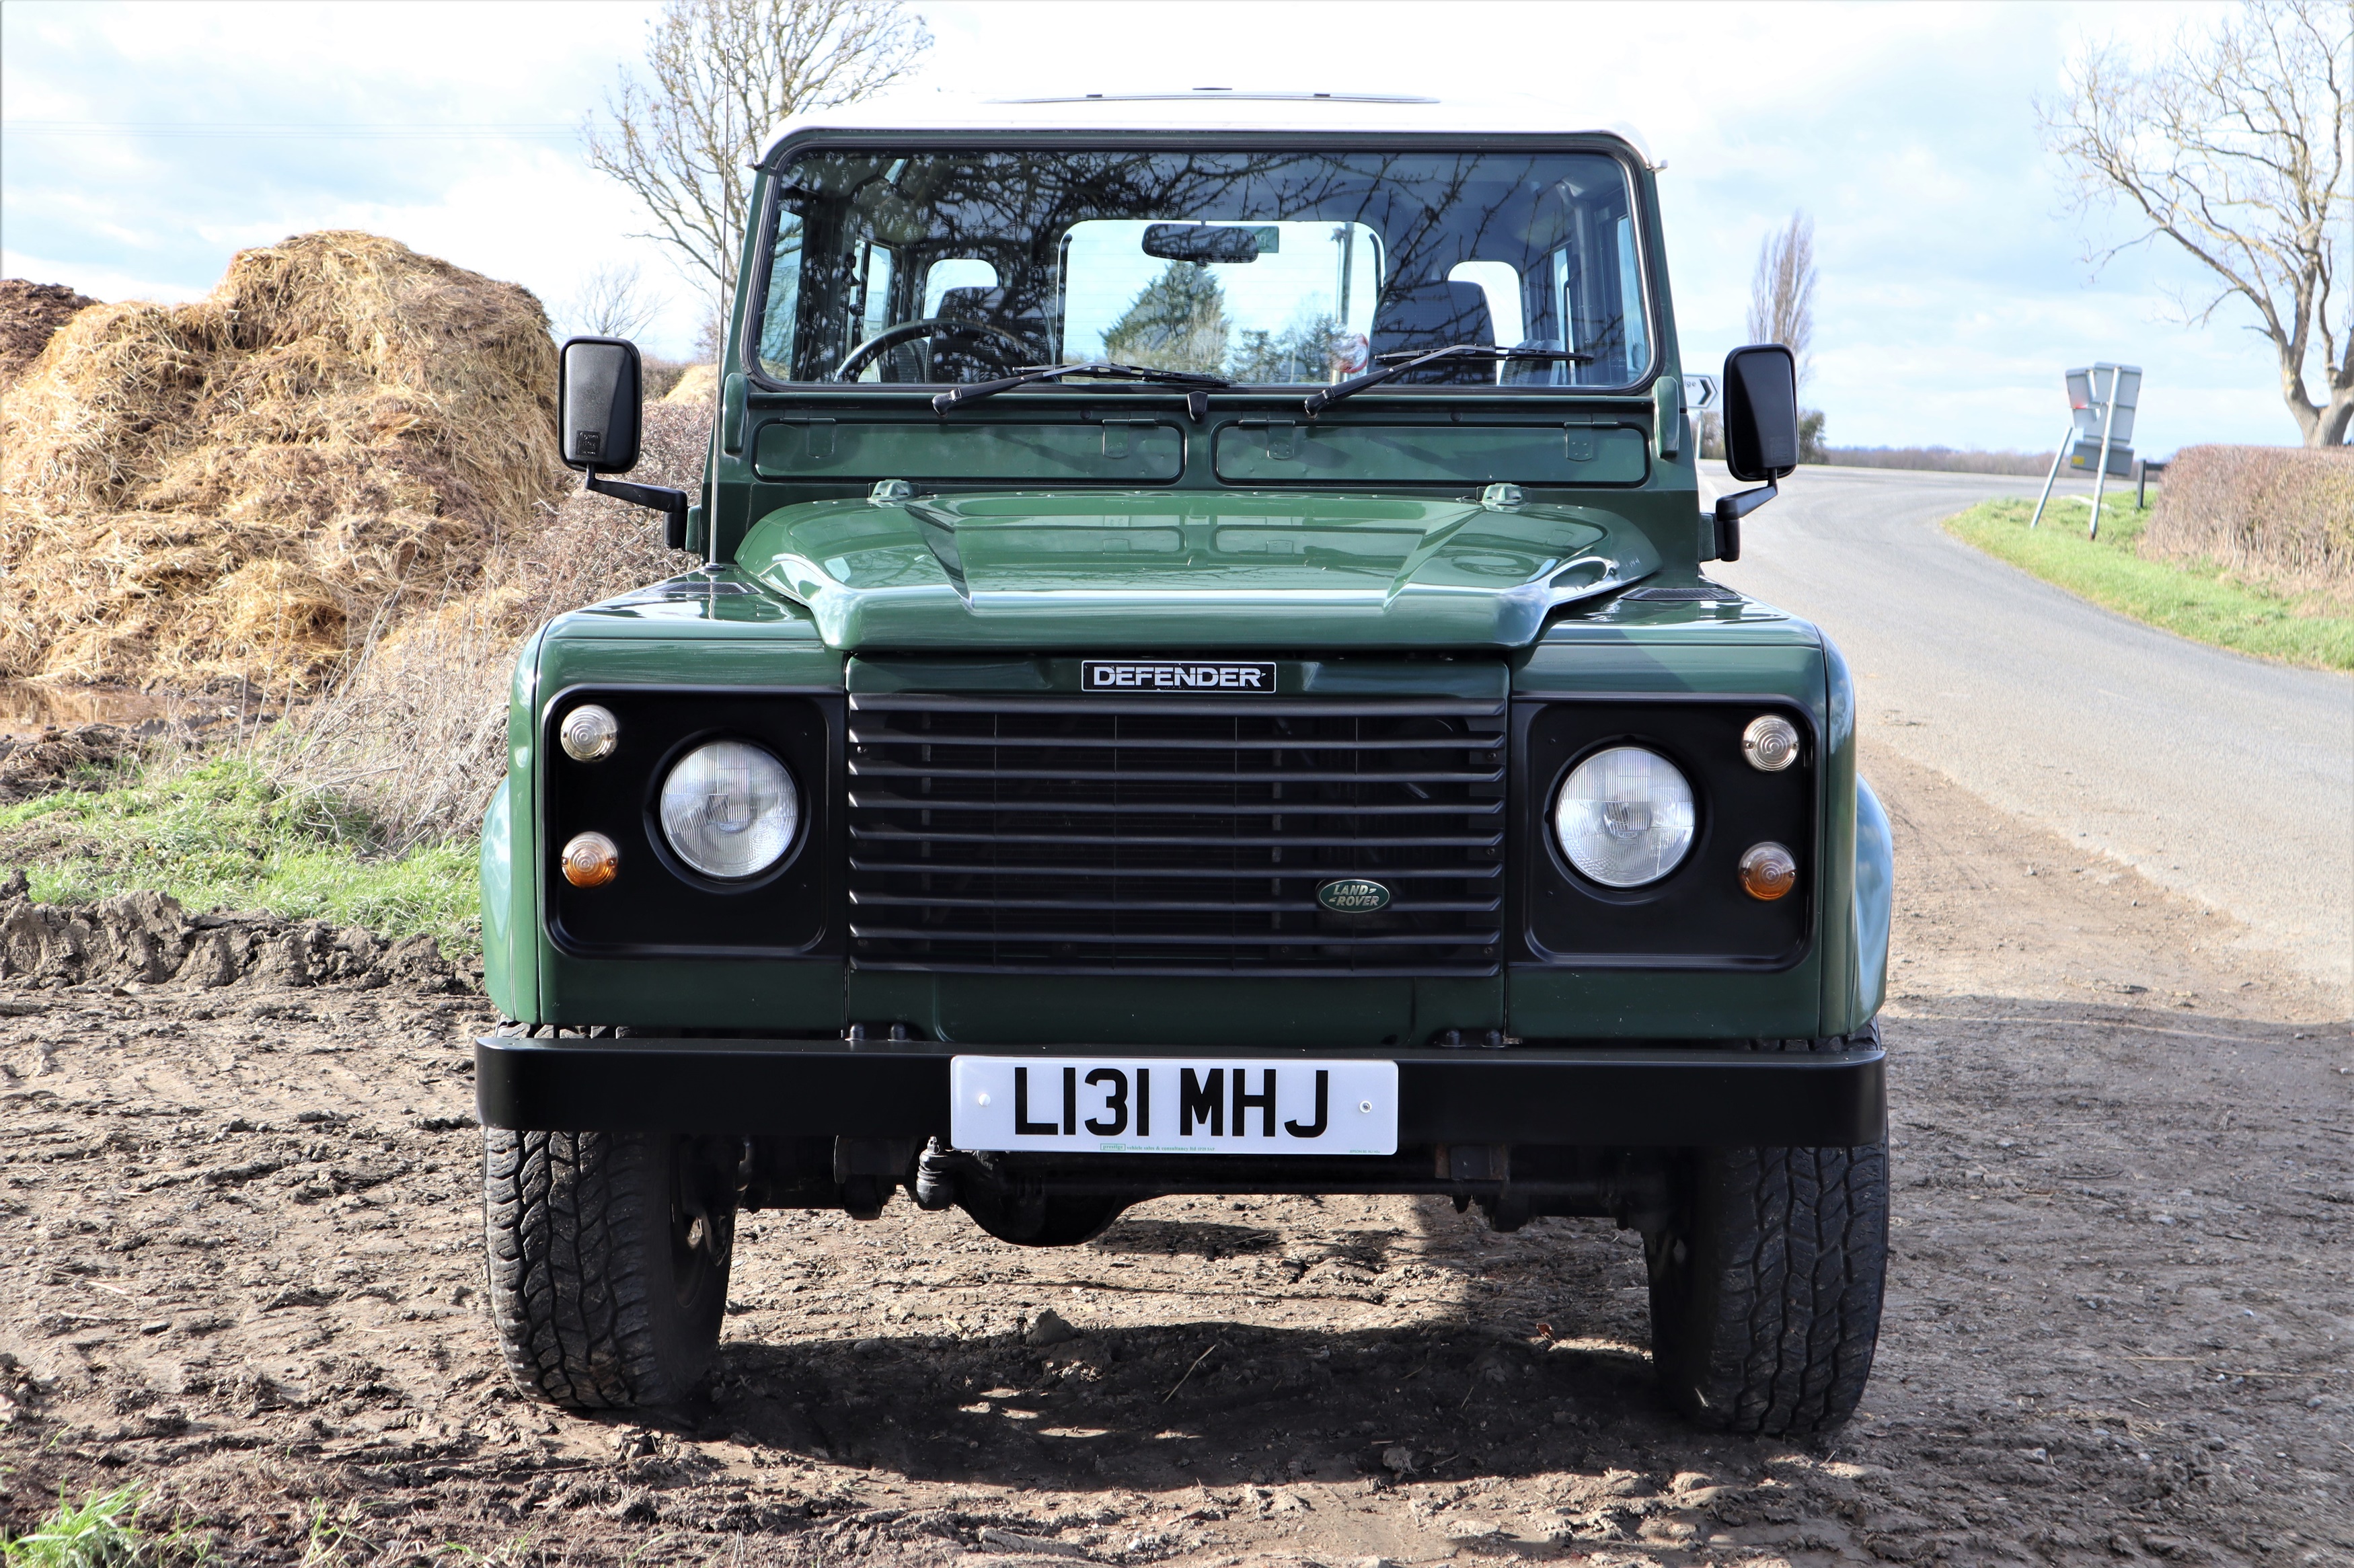 L134 GJX – 1993 Defender 90 – Available as is or refurbished to your own  specification